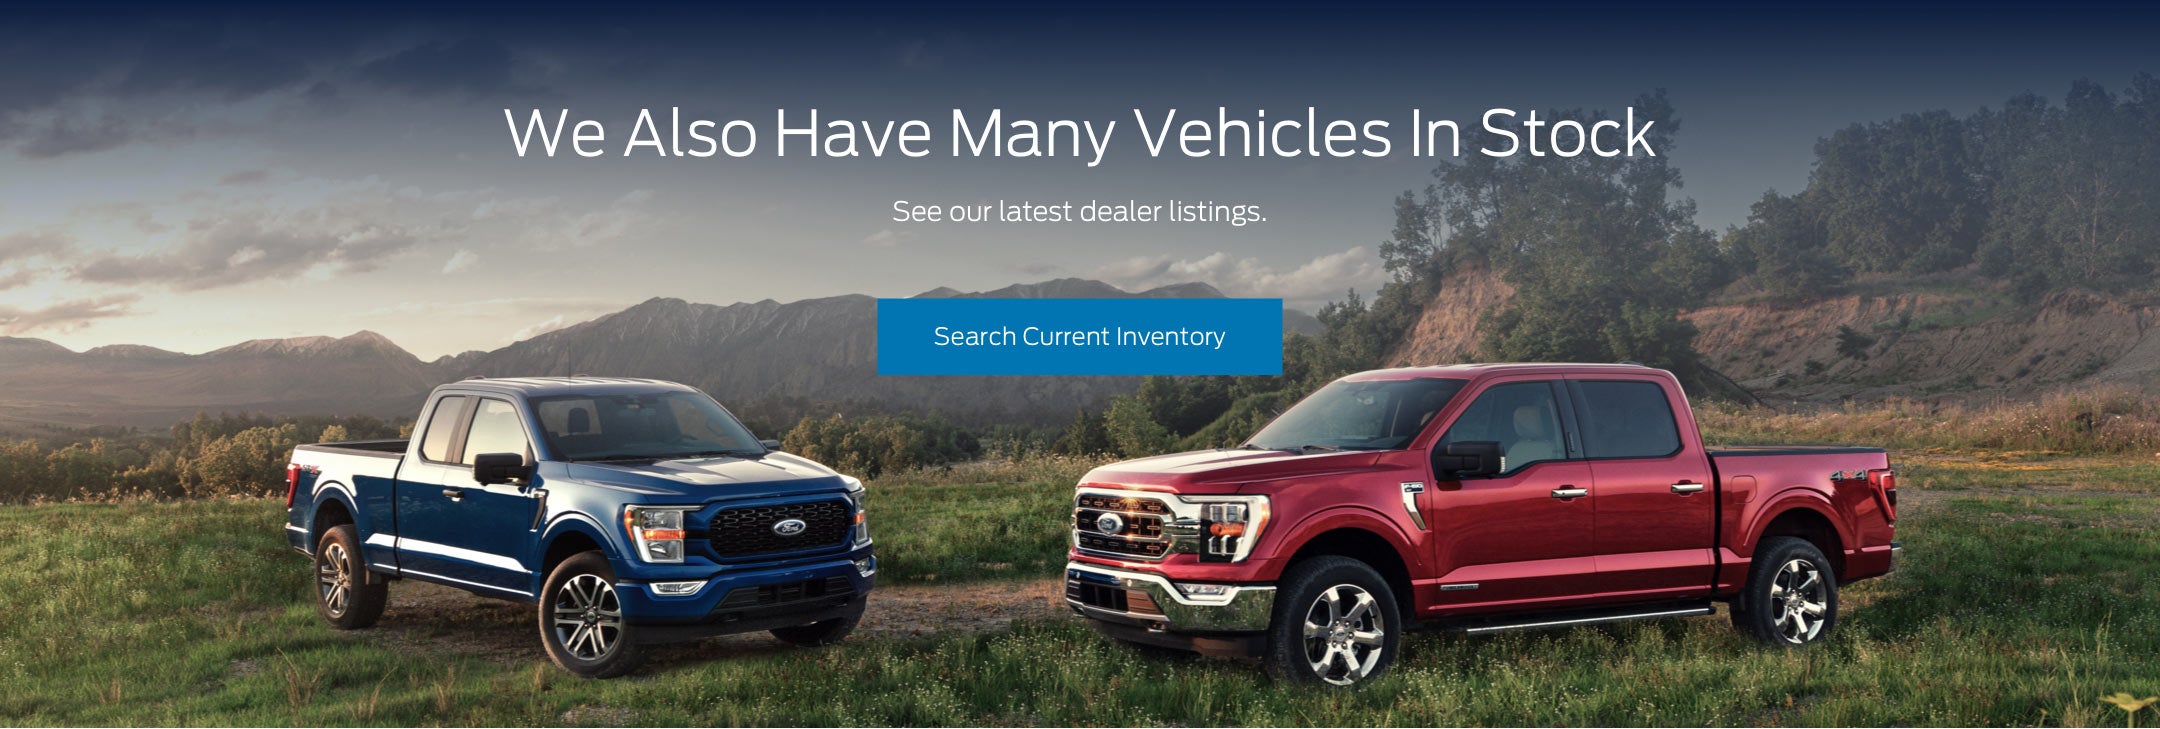 Ford vehicles in stock | LaFontaine Ford St Clair in Saint Clair MI